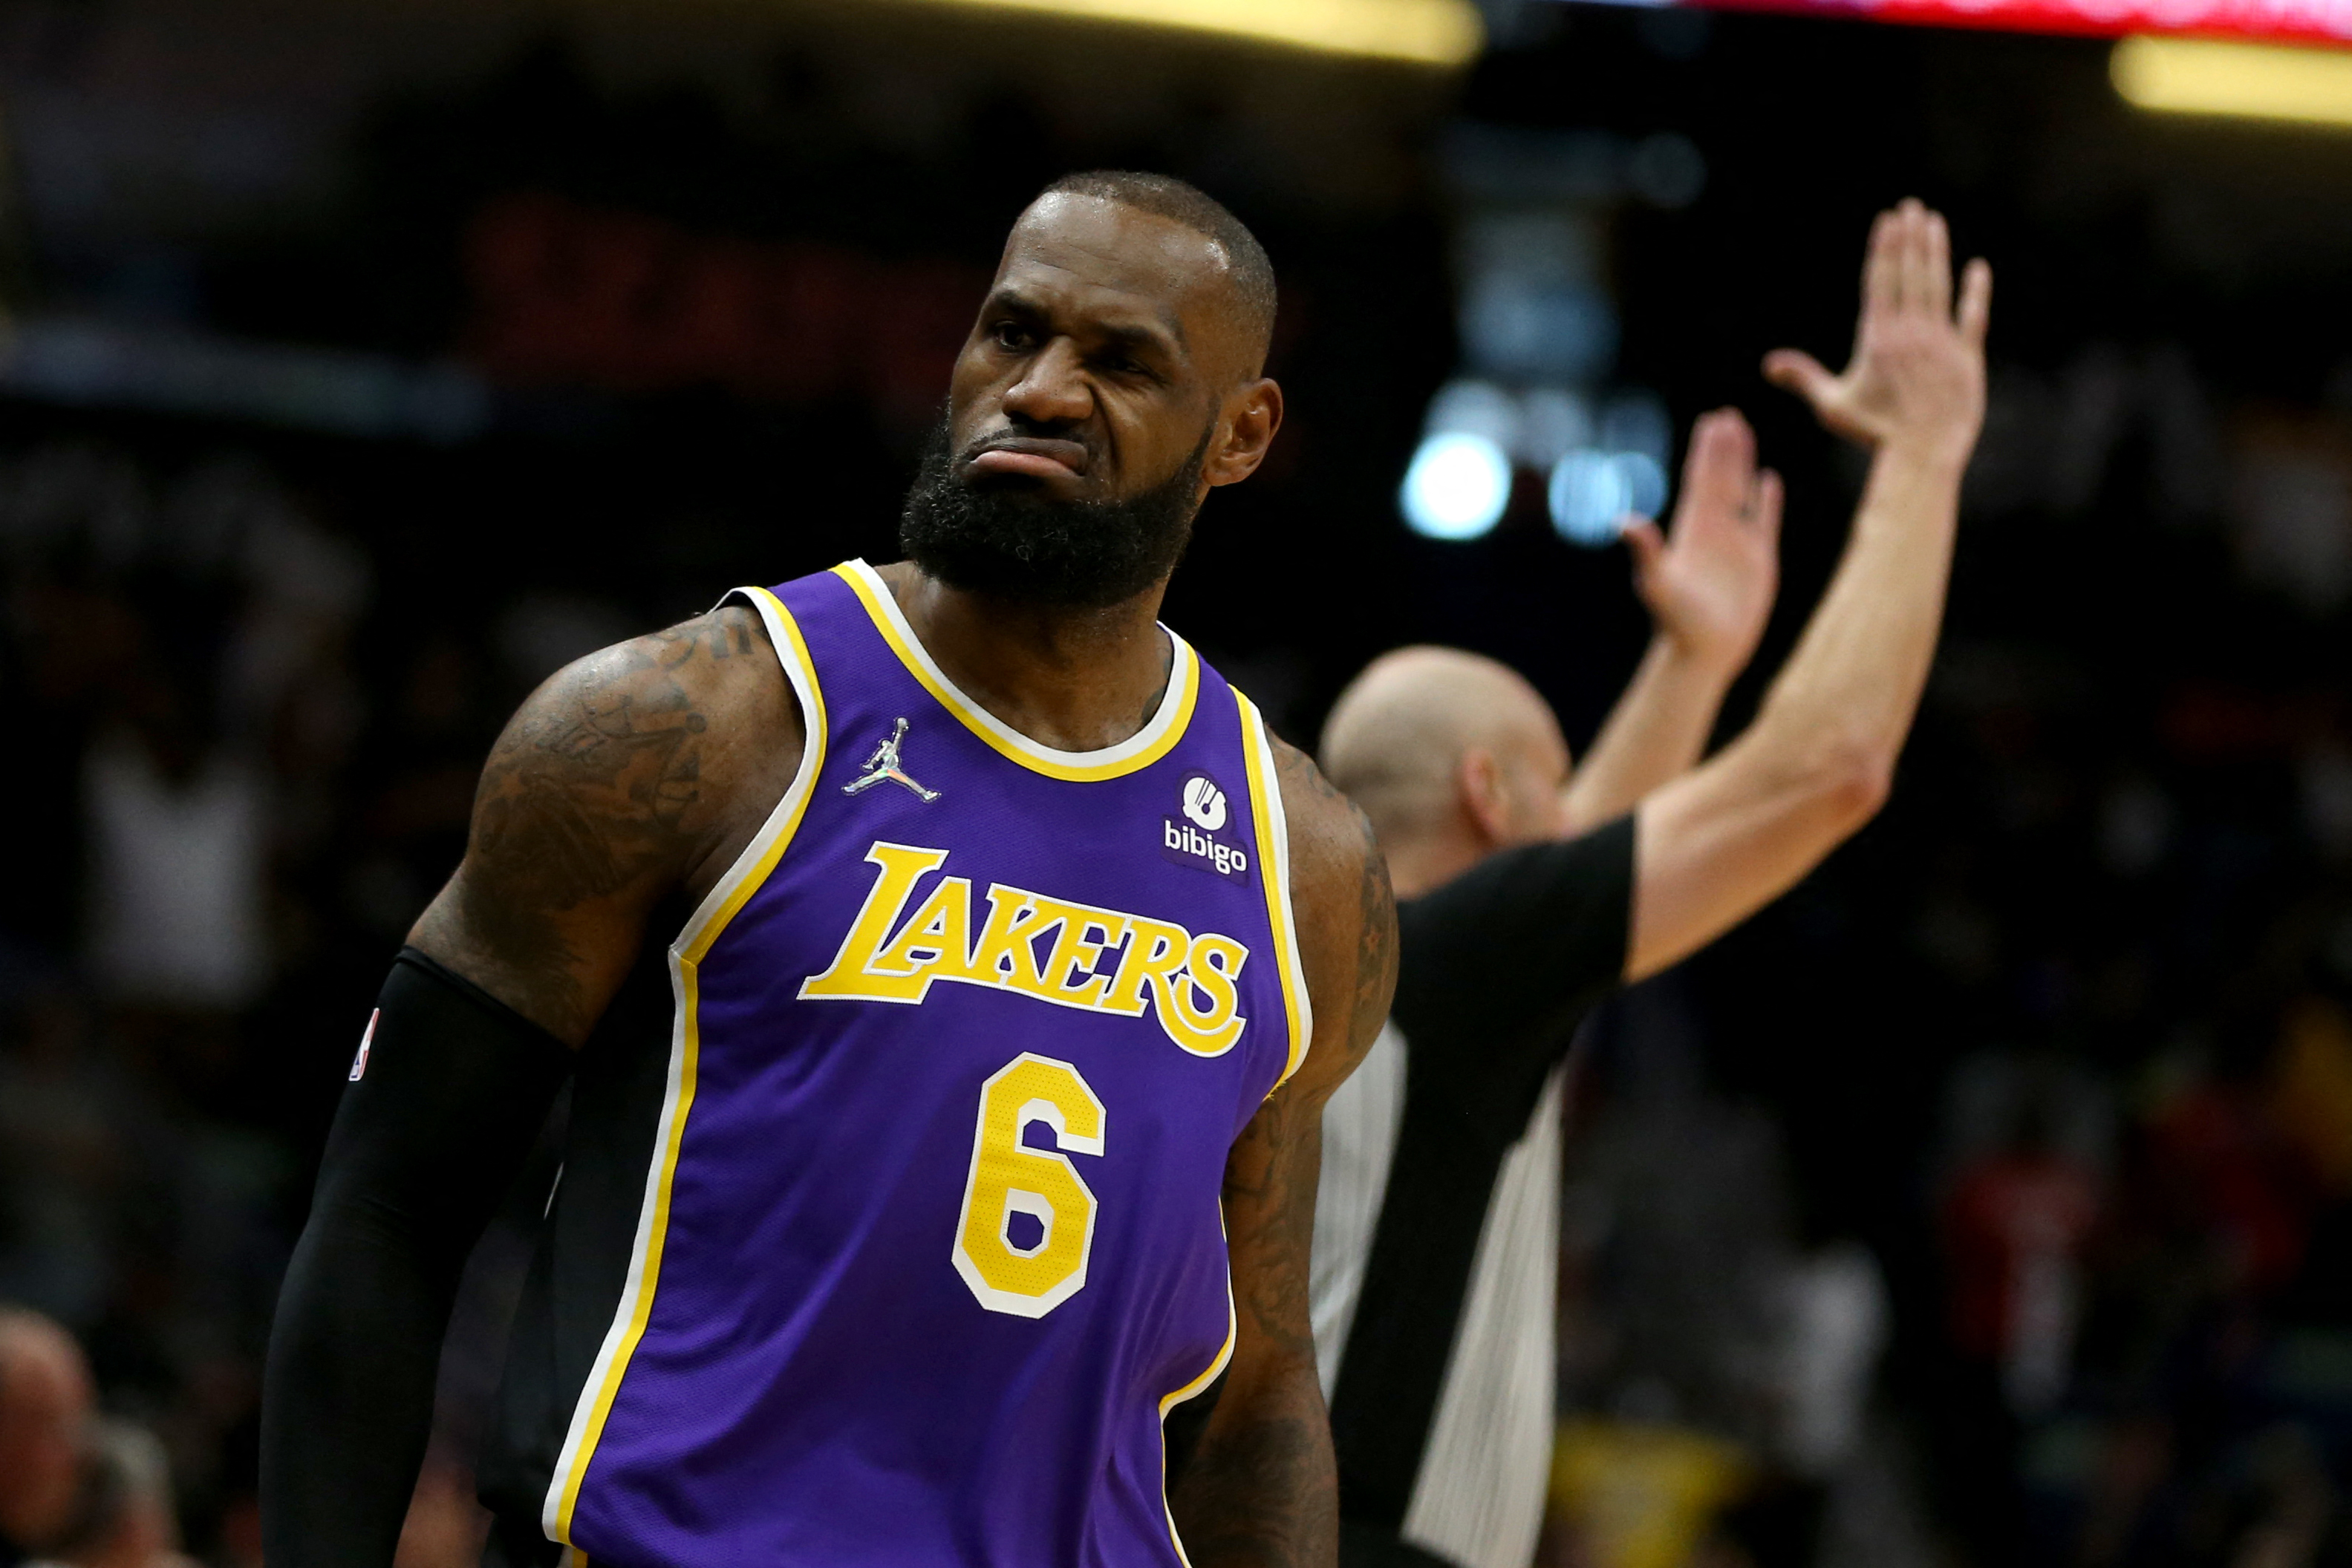 LeBron James is one of the top figures of the Los Angeles Lakers (Credit: Chuck Cook-USA TODAY Sports)